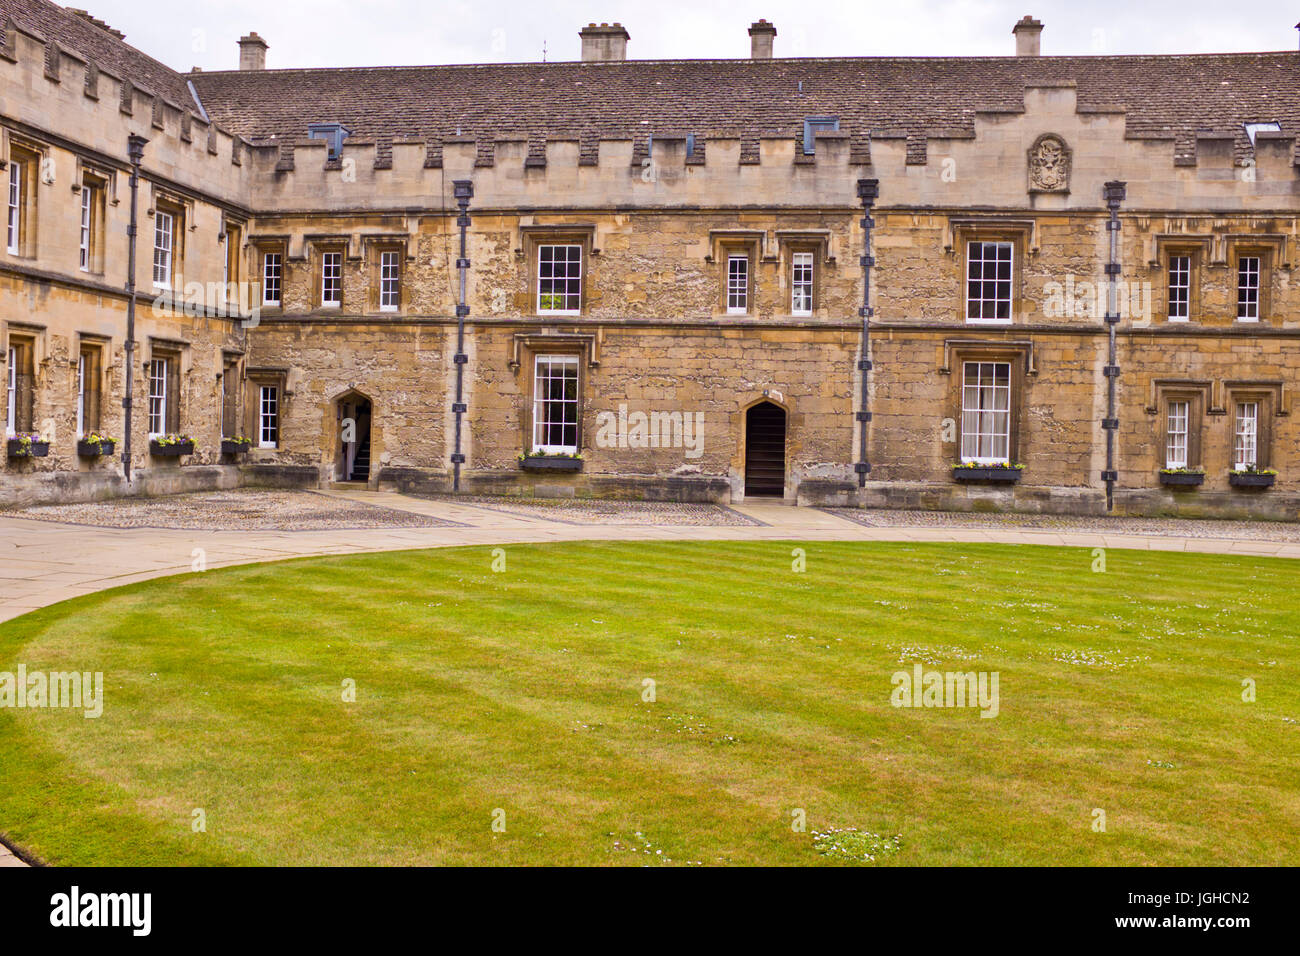 Universities of Oxford,Centre of Learning,Libraries,Gardens,Buildings,Accomodations,Coutyards,Oxford,Oxfordshire,UK Stock Photo